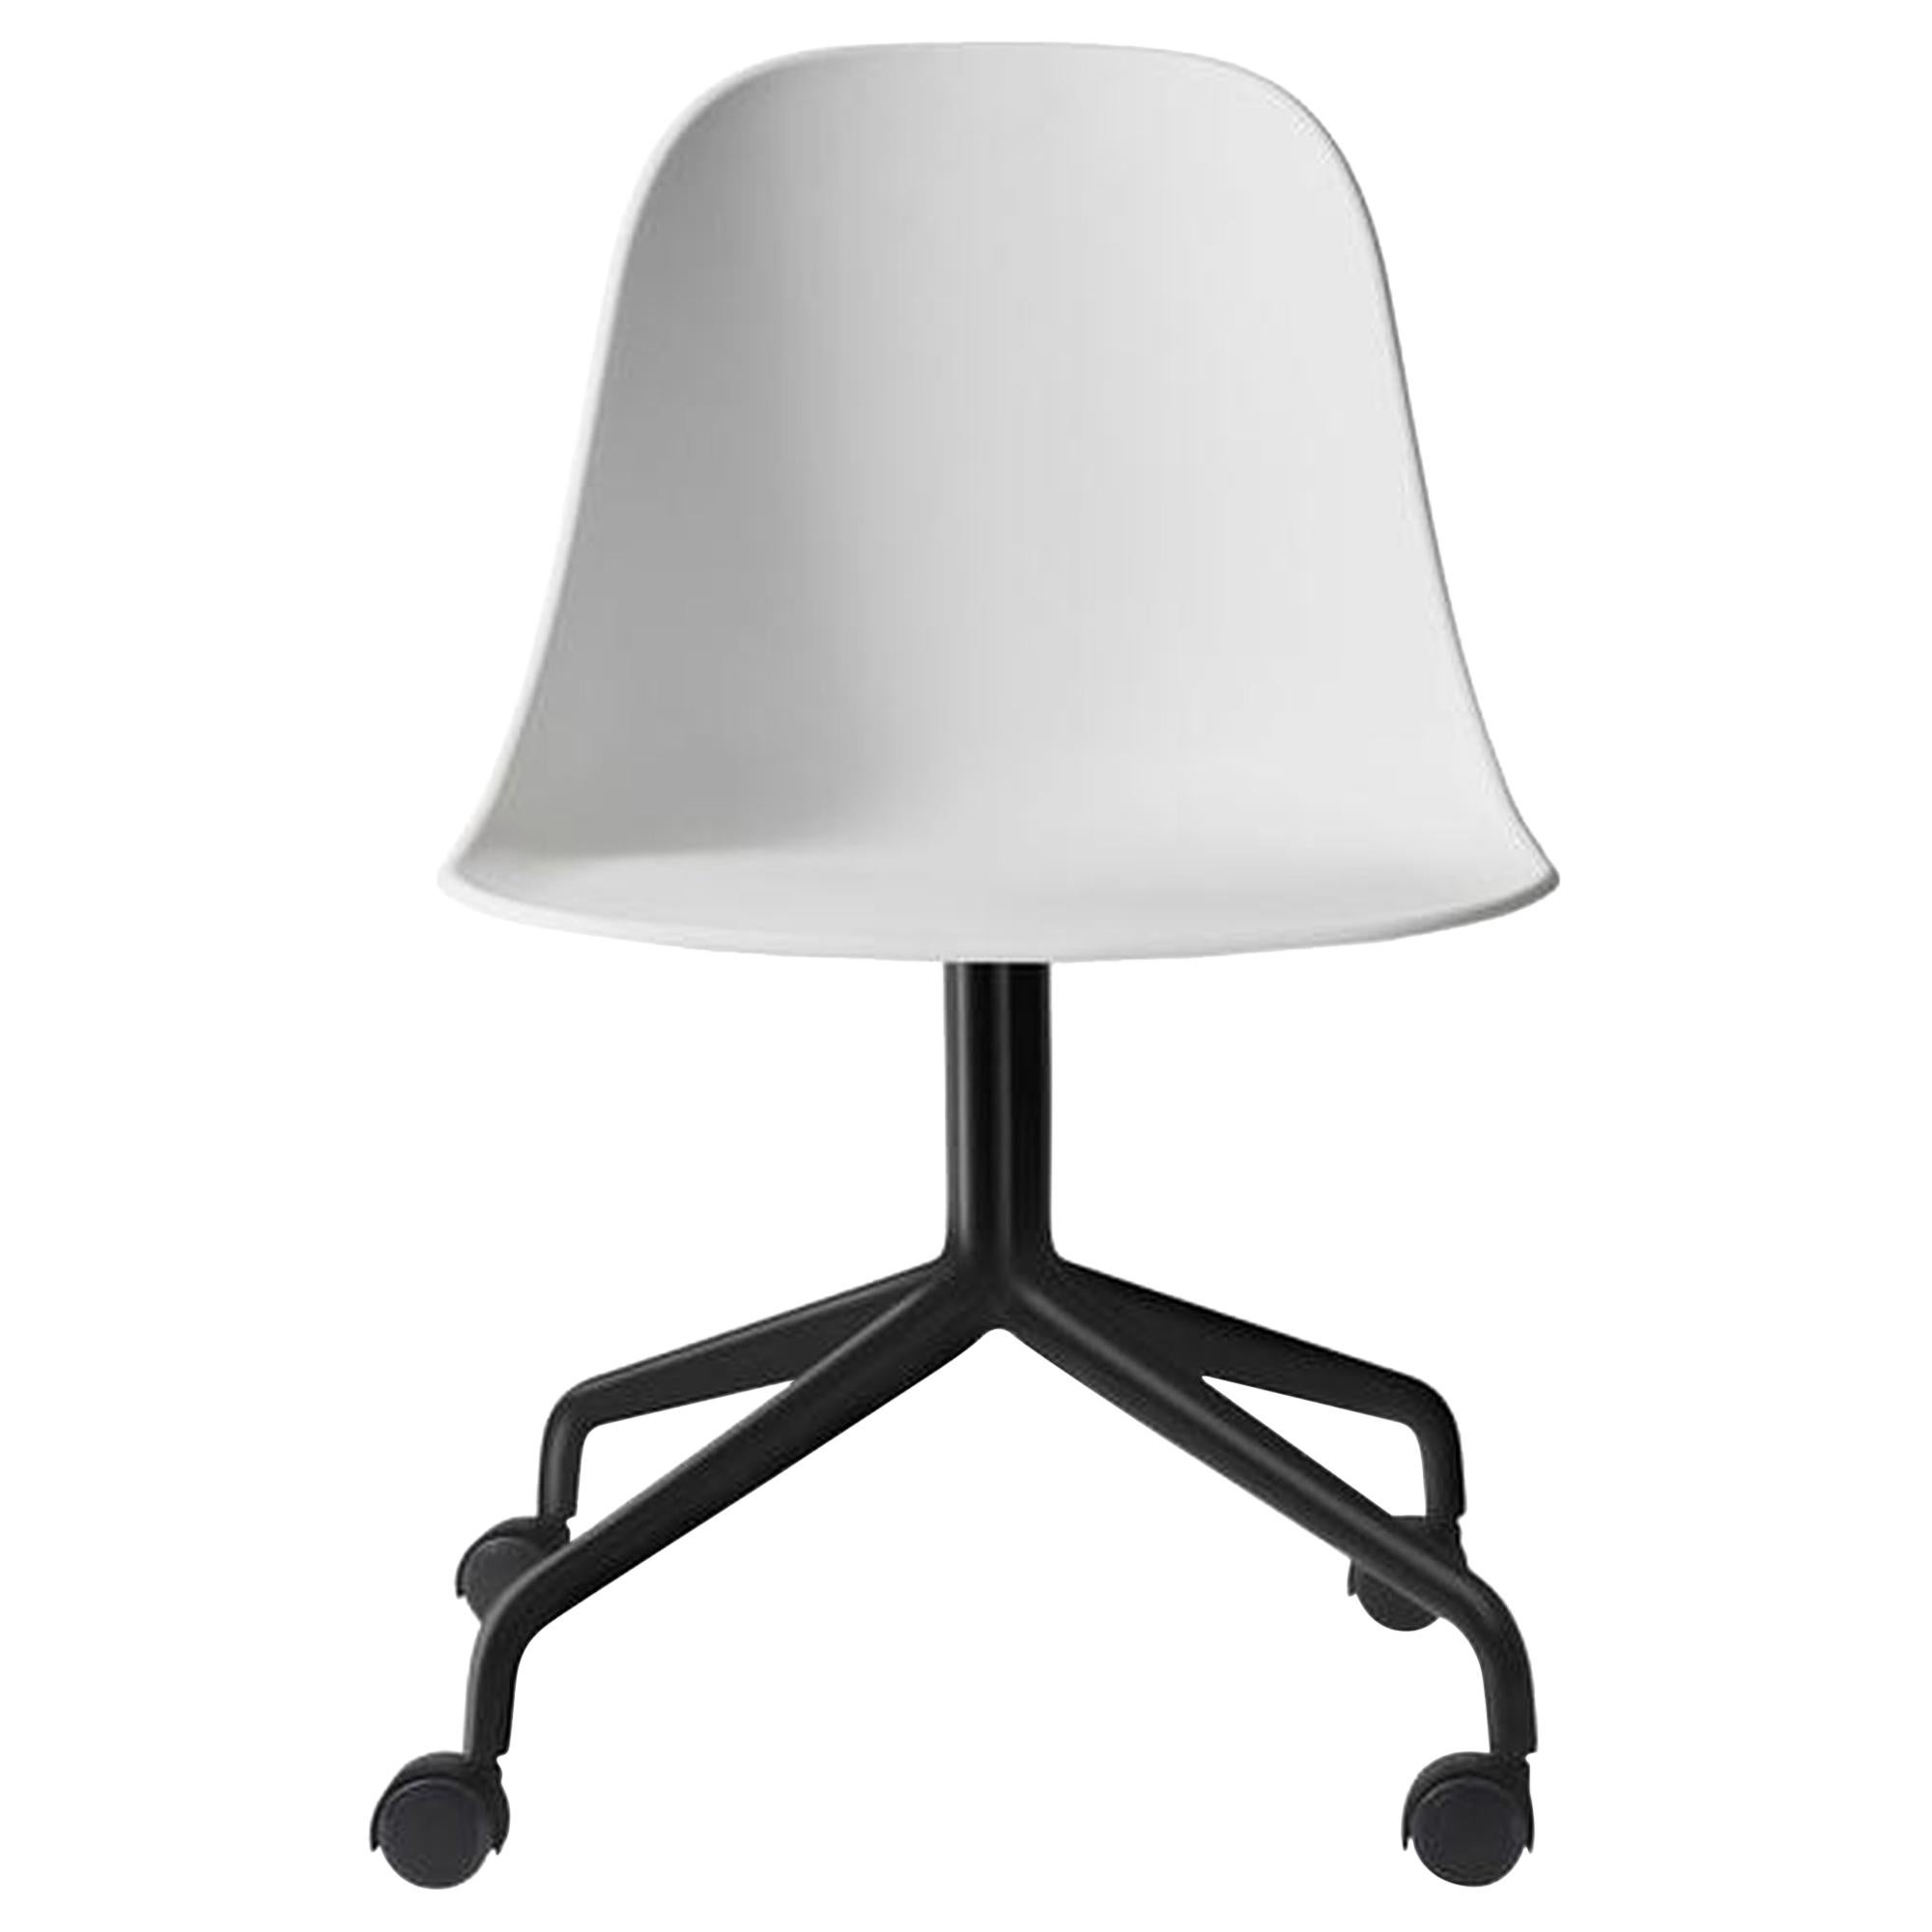 Harbour Side Chair, Black Steel Swivel Base with Caster, White Shell For Sale